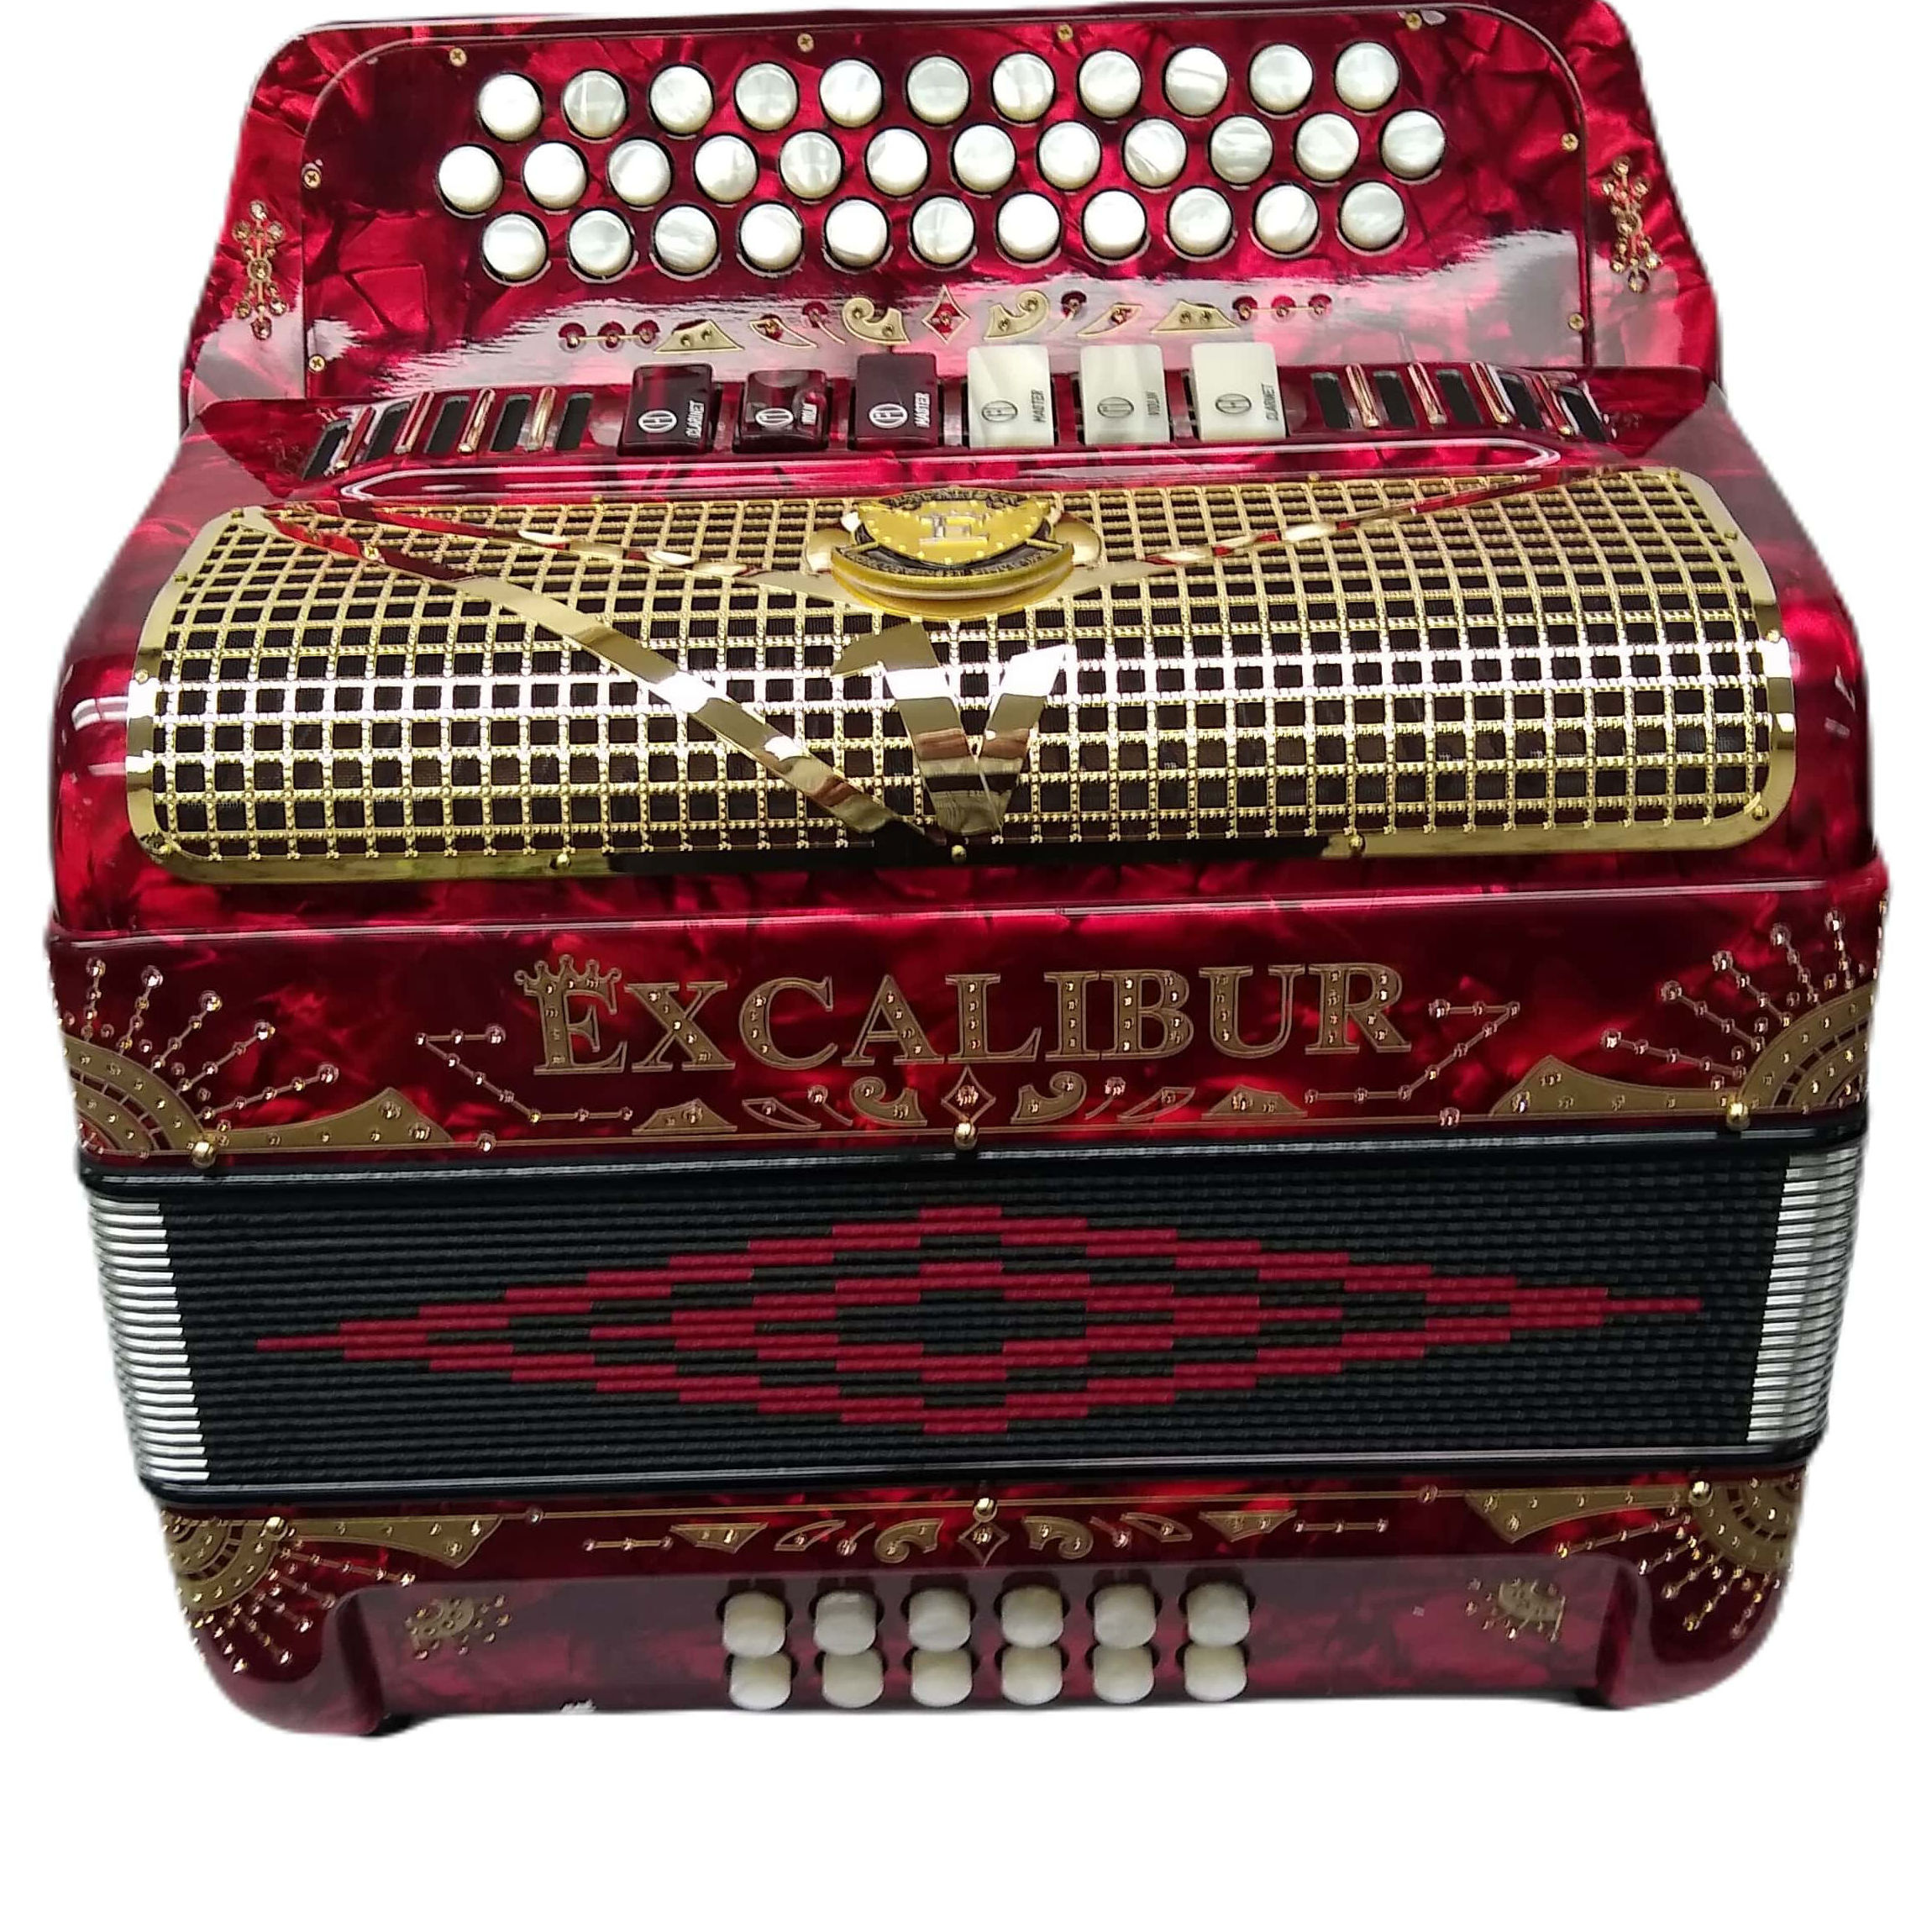 Excalibur Crown Series 2 Tone Button Accordion Ruby Red & Gold GCF FBbEb